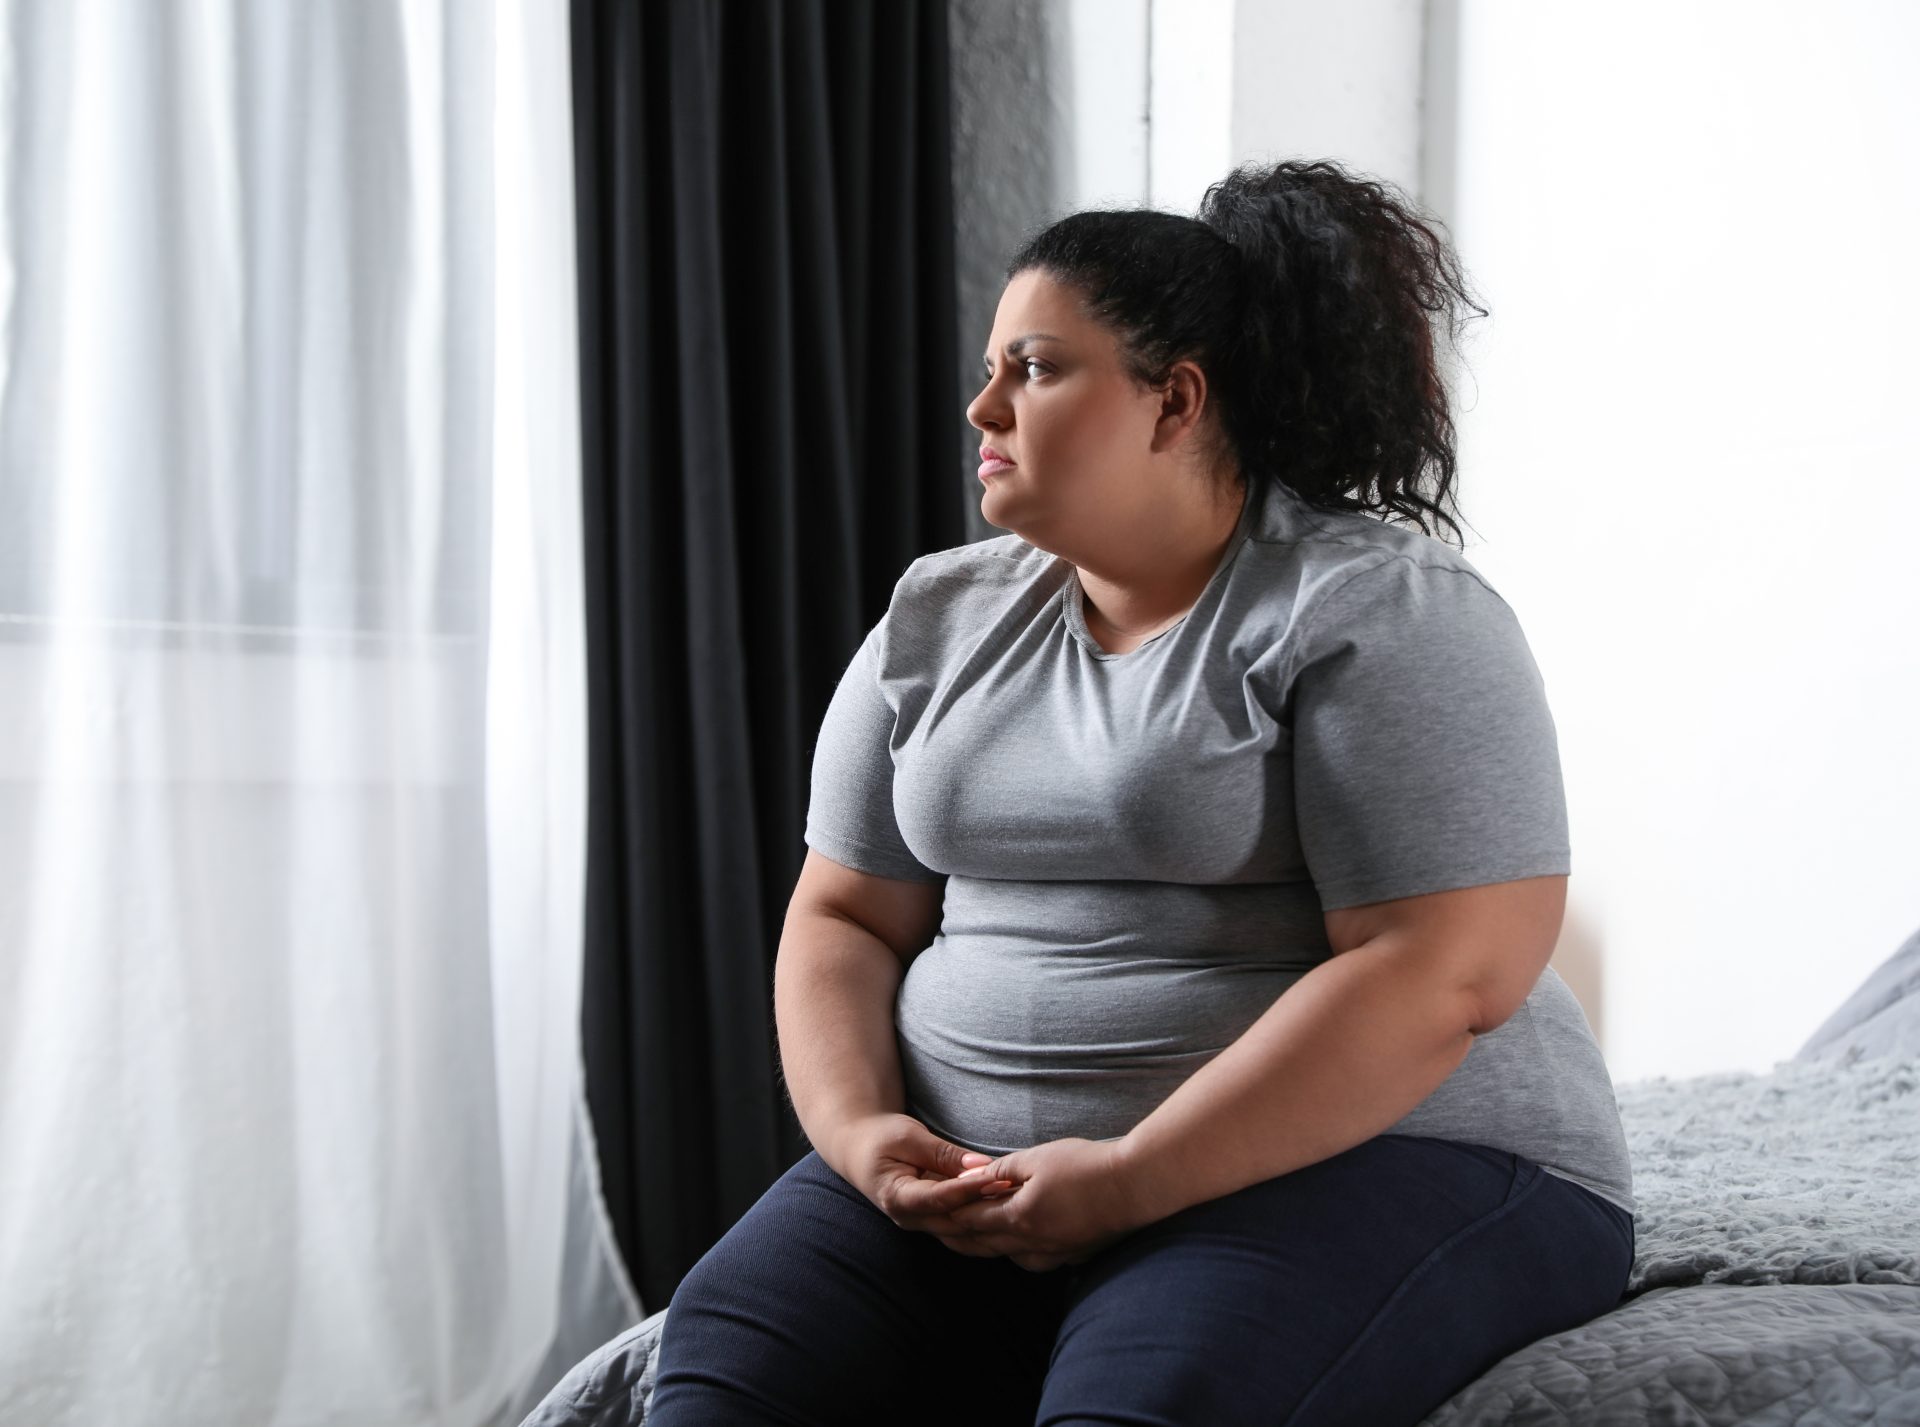 Overweight woman looking sad on a bed